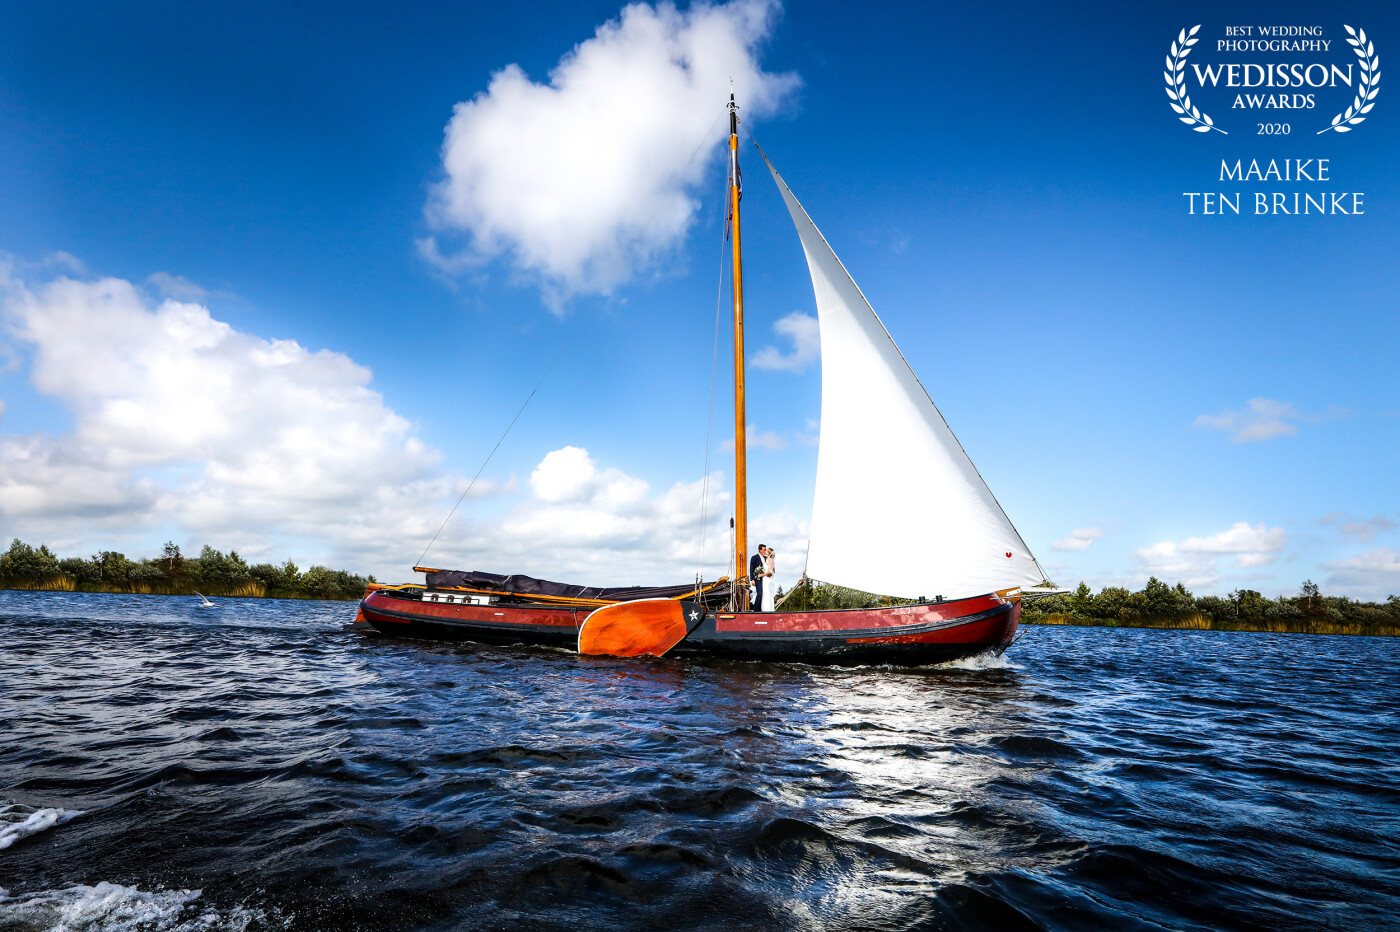 A lovely reportage in the Netherlands! During the wedding reportage, the bridal couple went sailing in a boat. The weather was fine and I was allowed to make a few laps around the boat in a lifeboat! A great day with beautiful pictures!